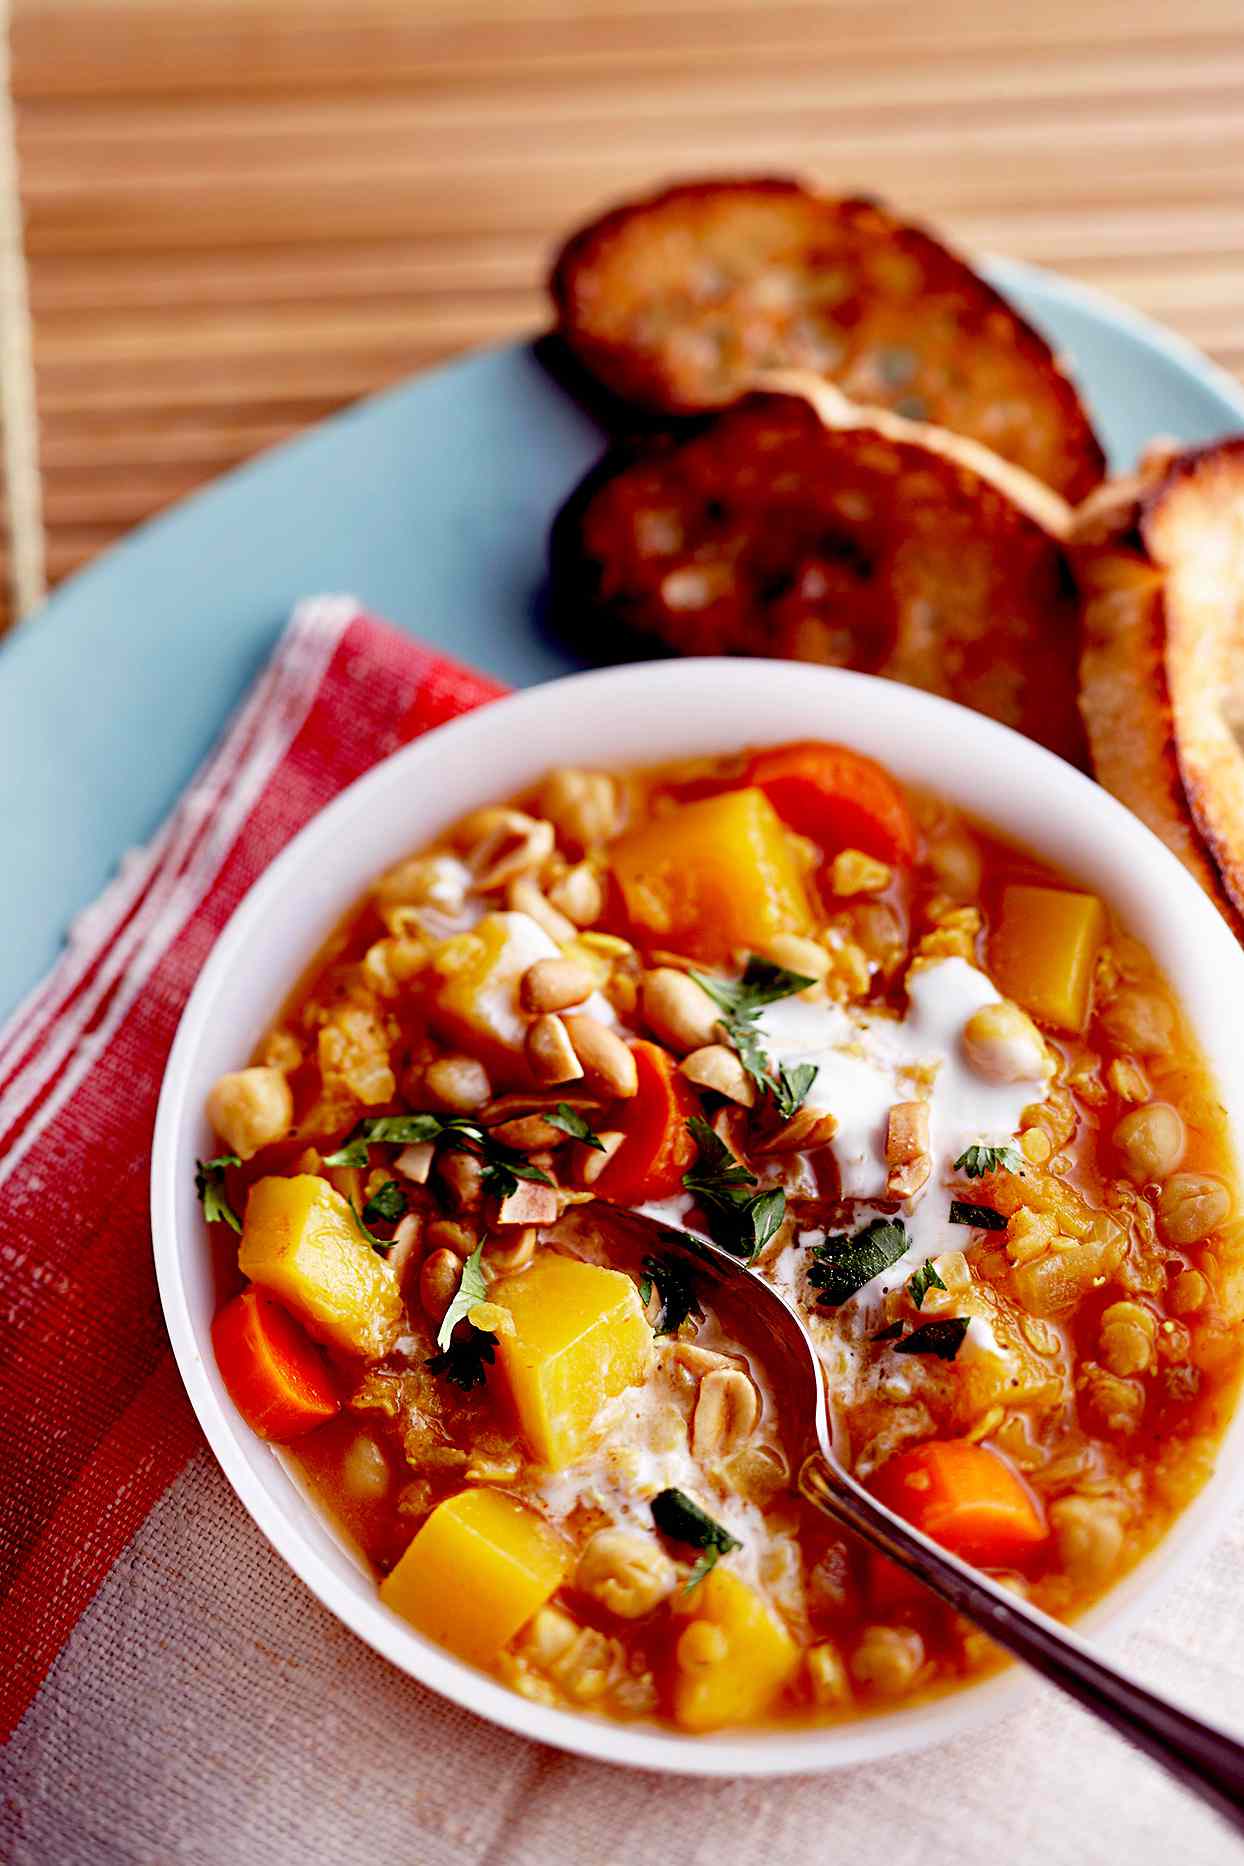 Pumpkin, Chickpea, and Red Lentil Stew 